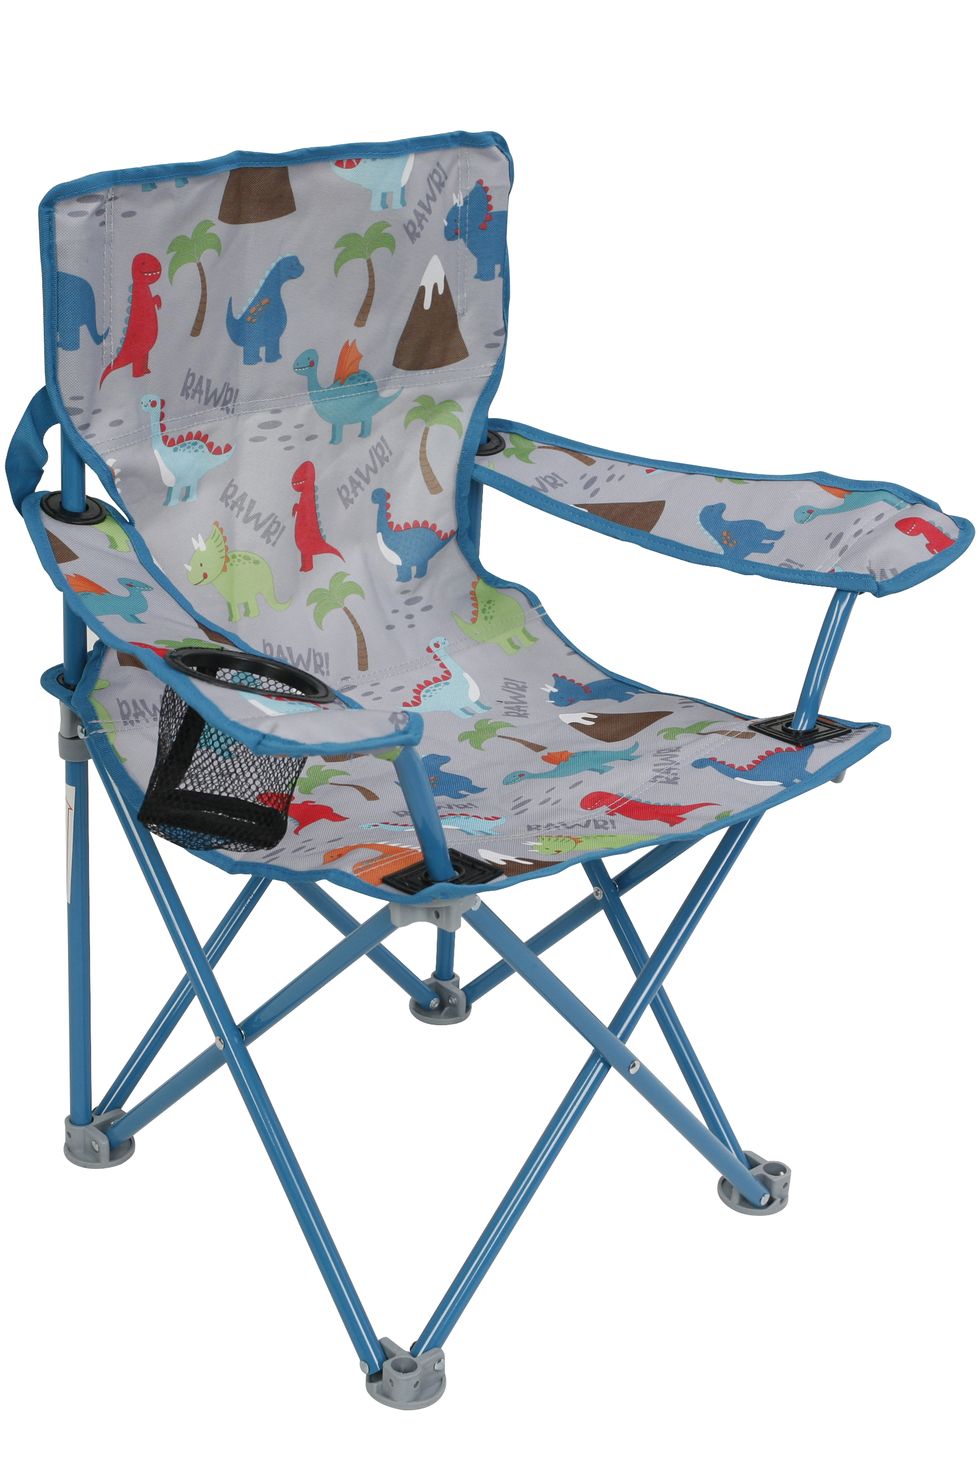 Crckt Folding Camp Chair for Kids with Lock 